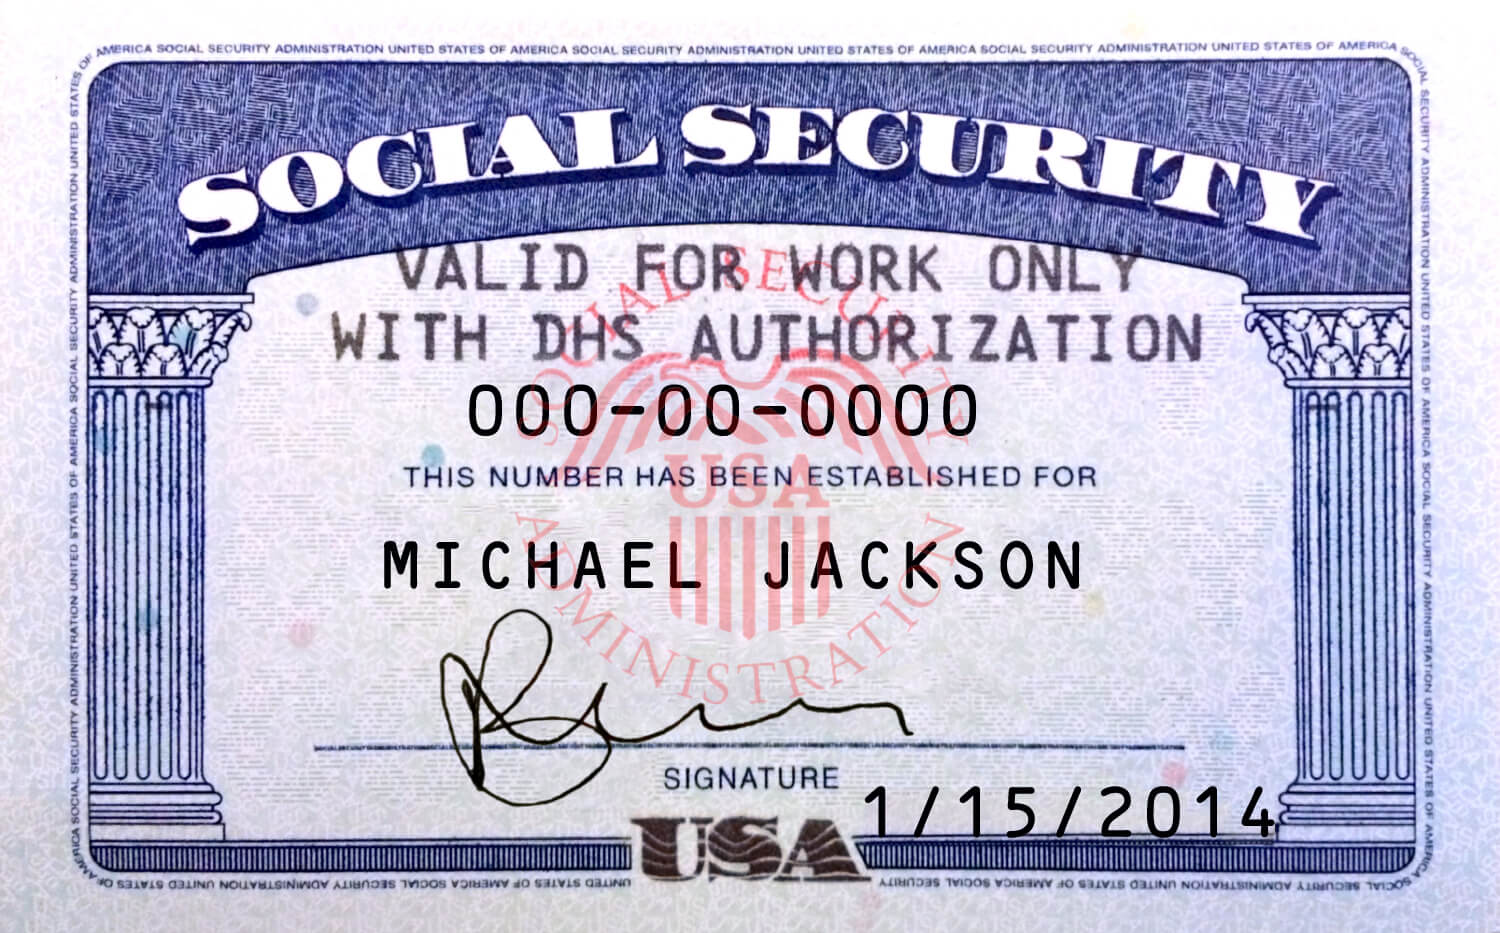 61 [Pdf] Social Security Number 765 Generator Printable Hd For Social Security Card Template Pdf